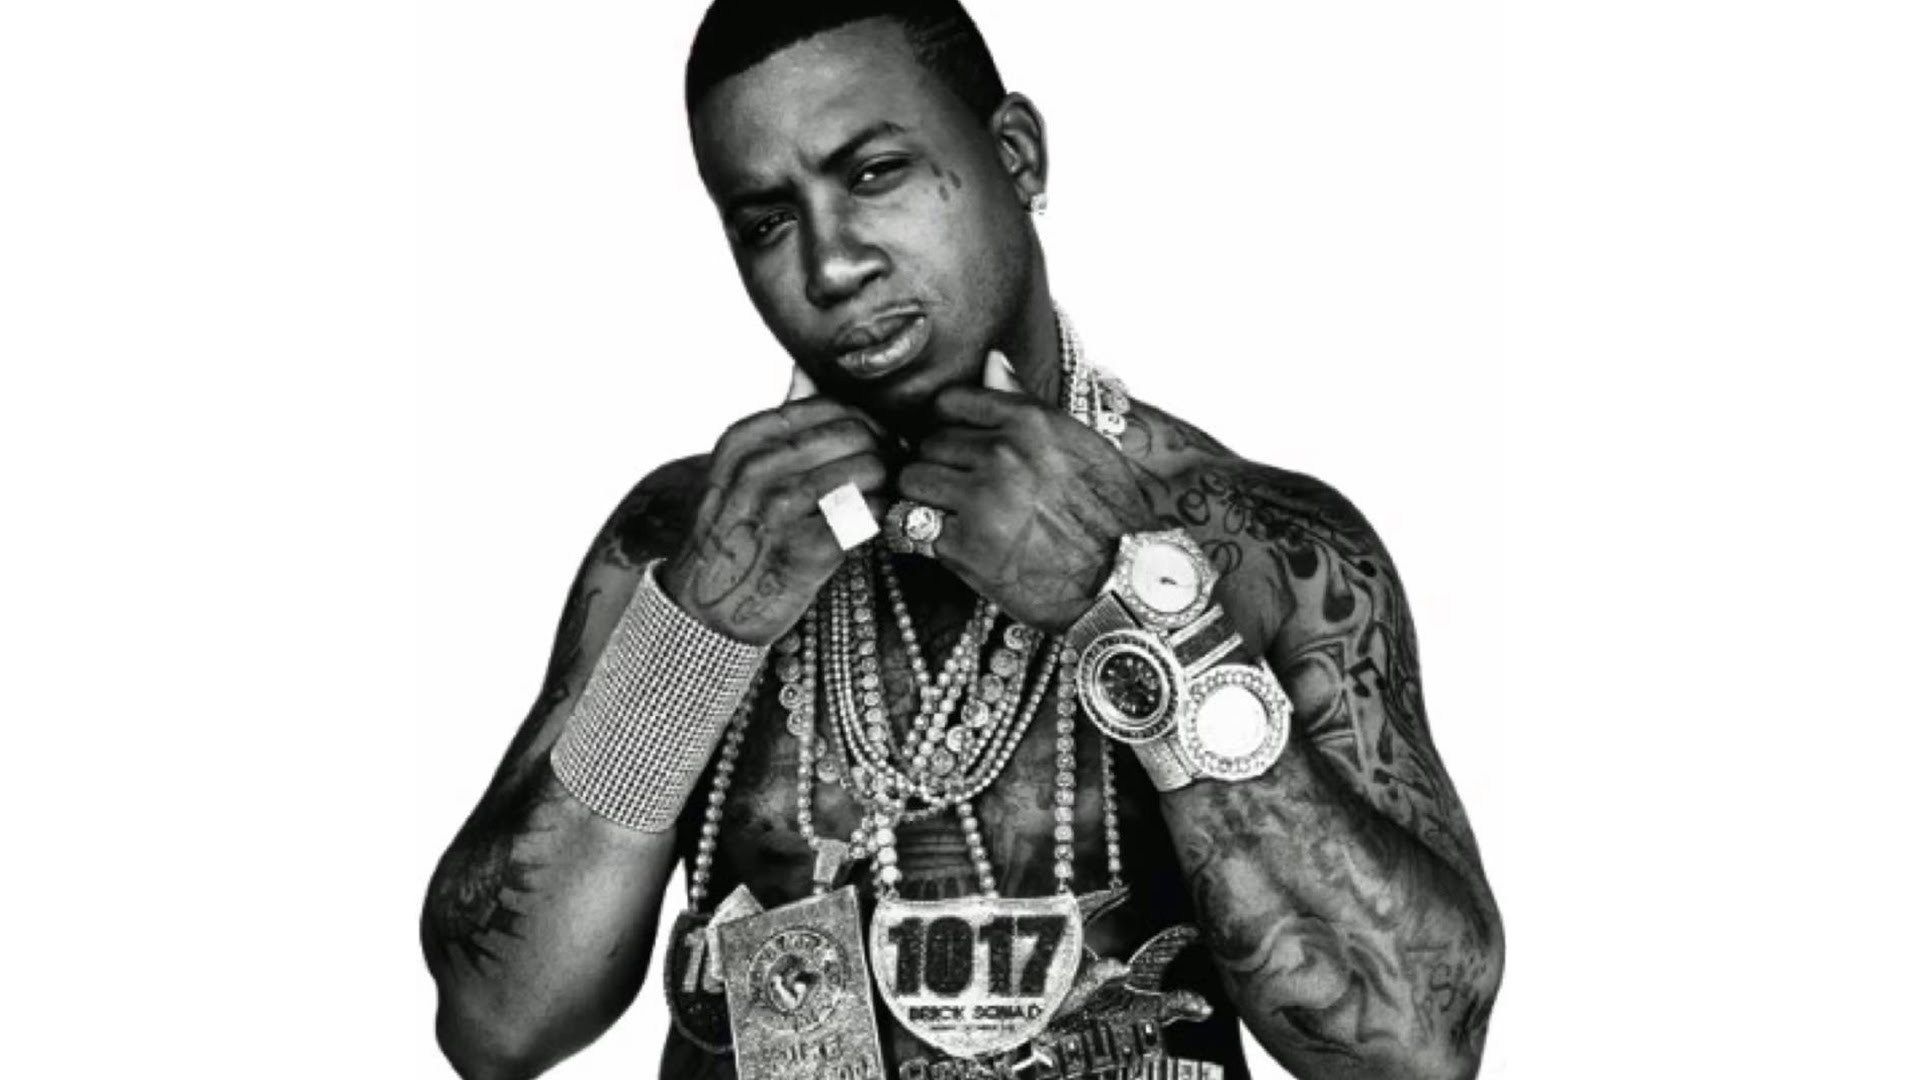 Gucci Mane Iphone Wallpapers